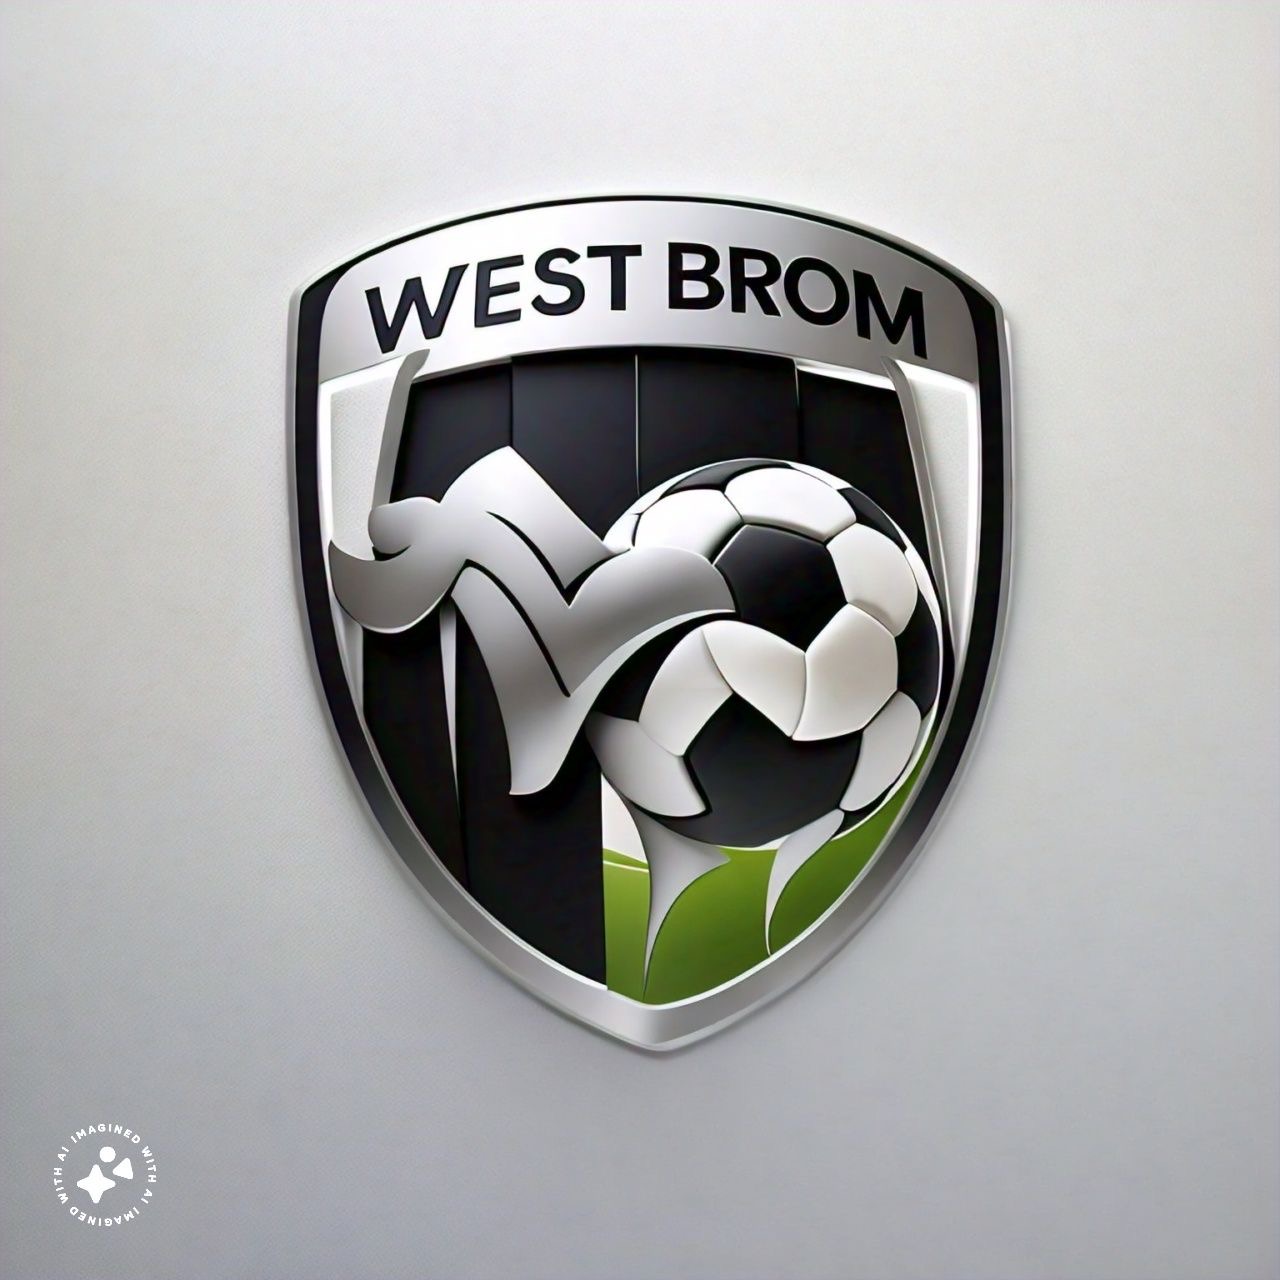 Report: West brom very close to complete deal for $10M Premier league star